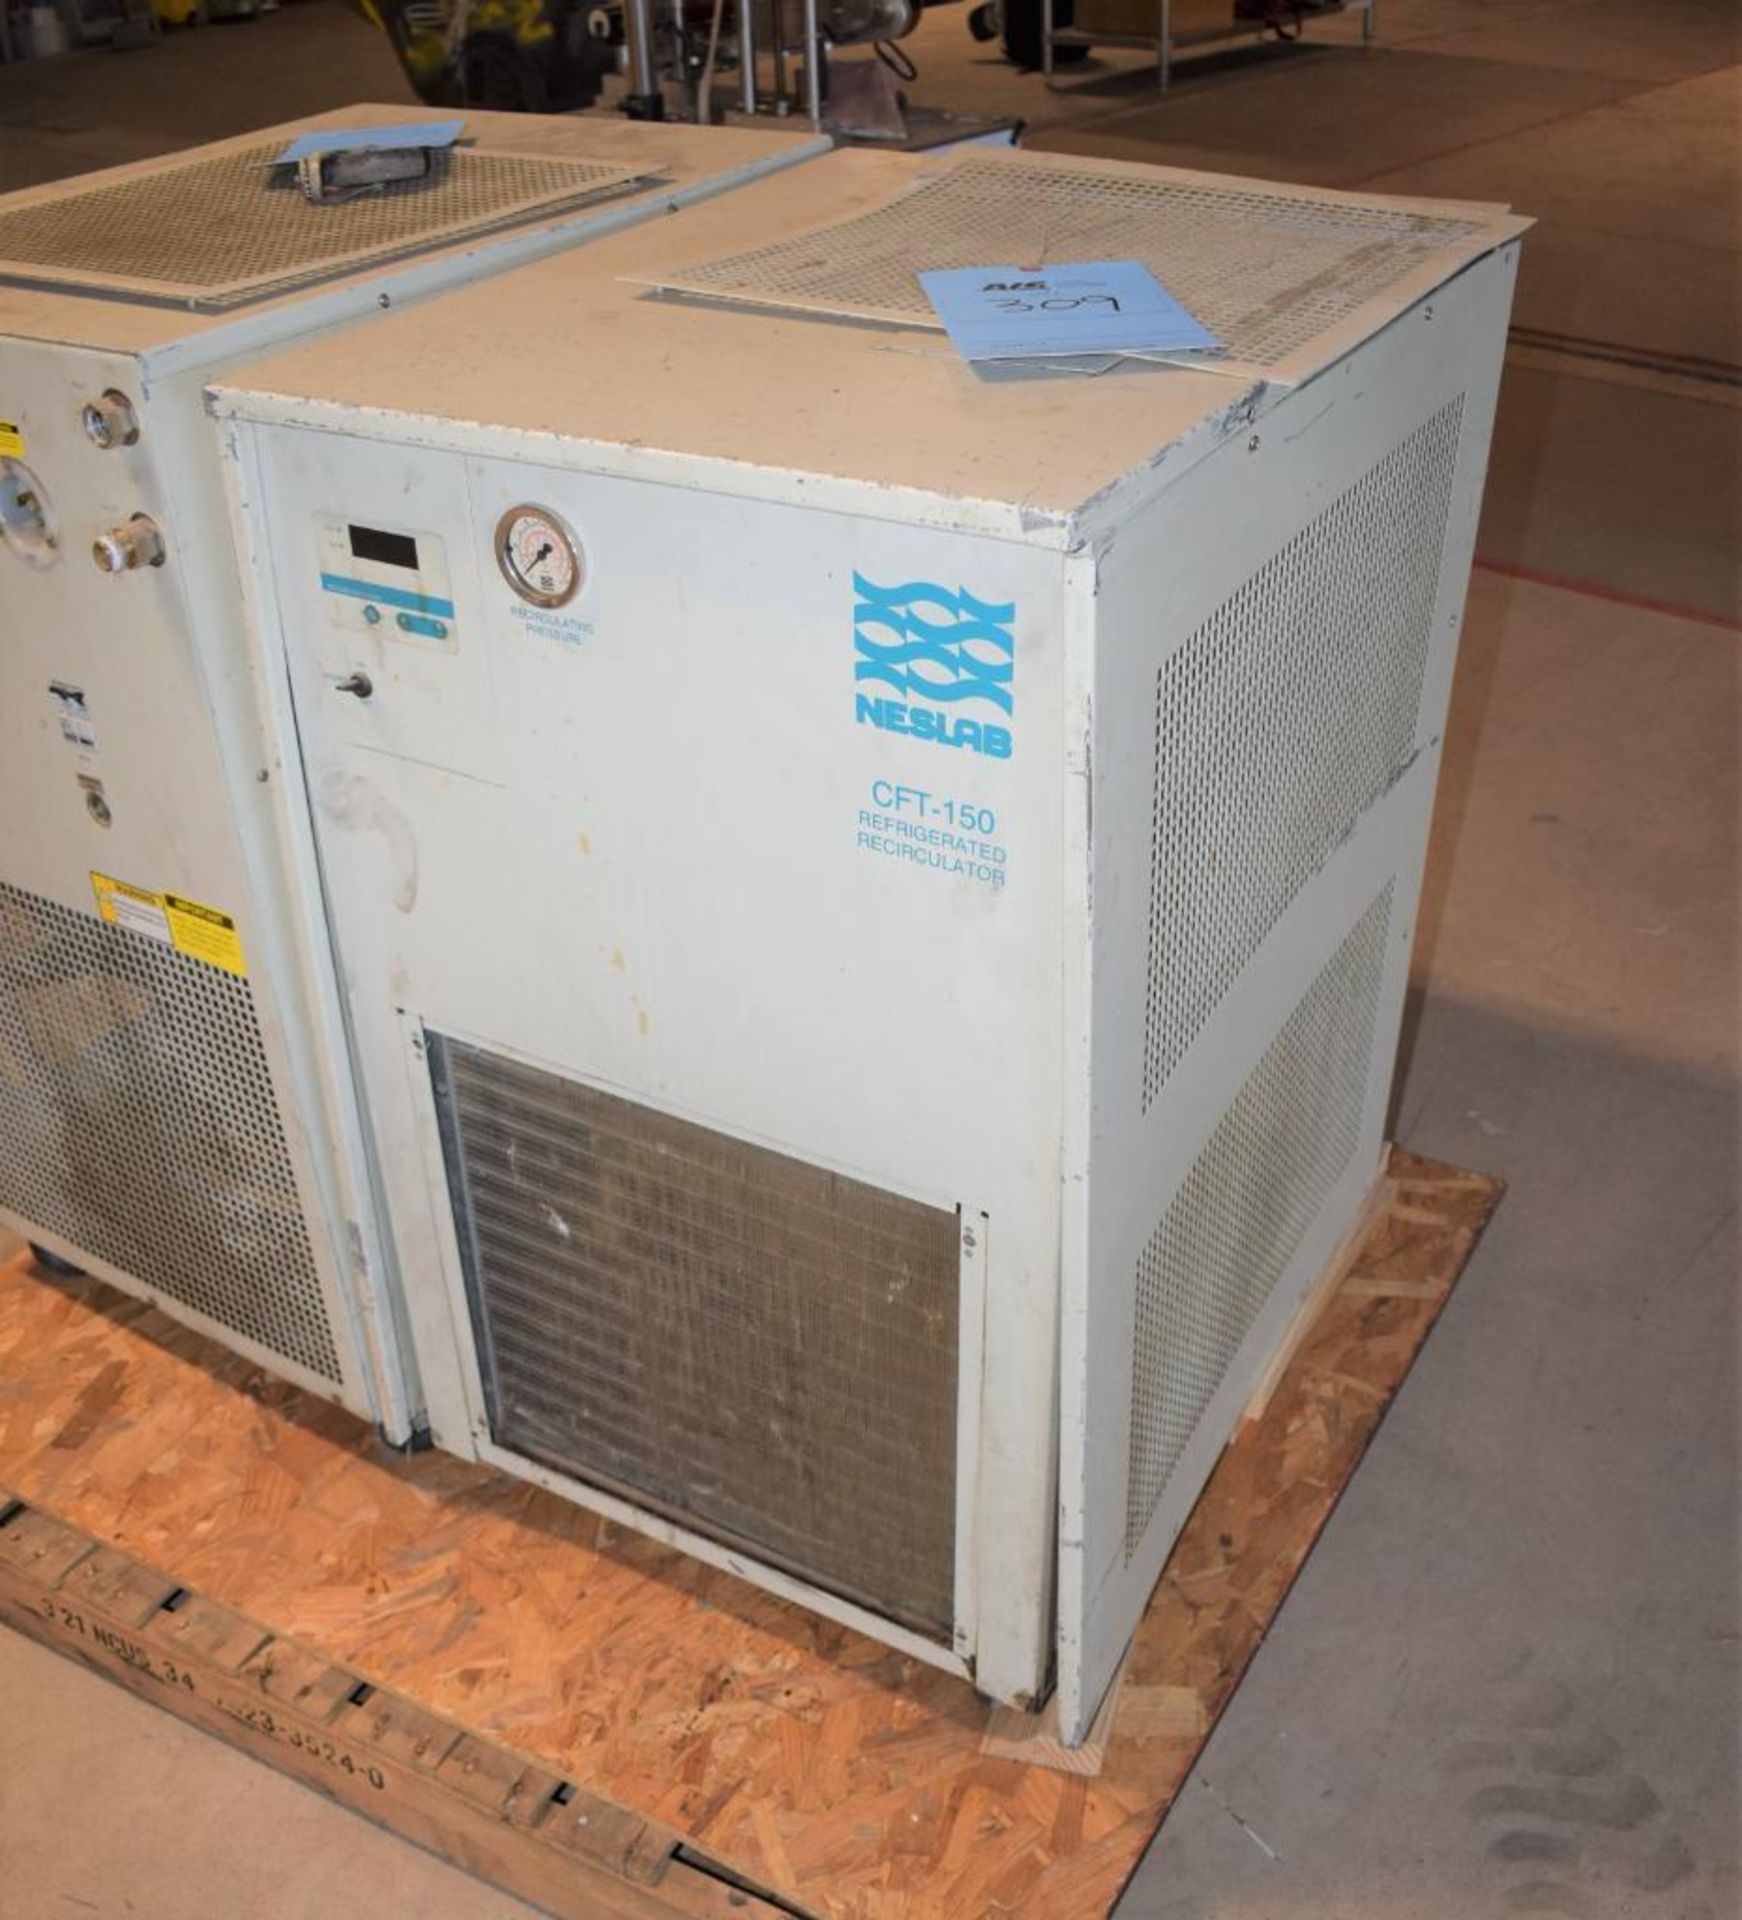 Thermo Neslab Recirculating Chiller, Model CFT-150. Approximate operating temperature range +5 to +3